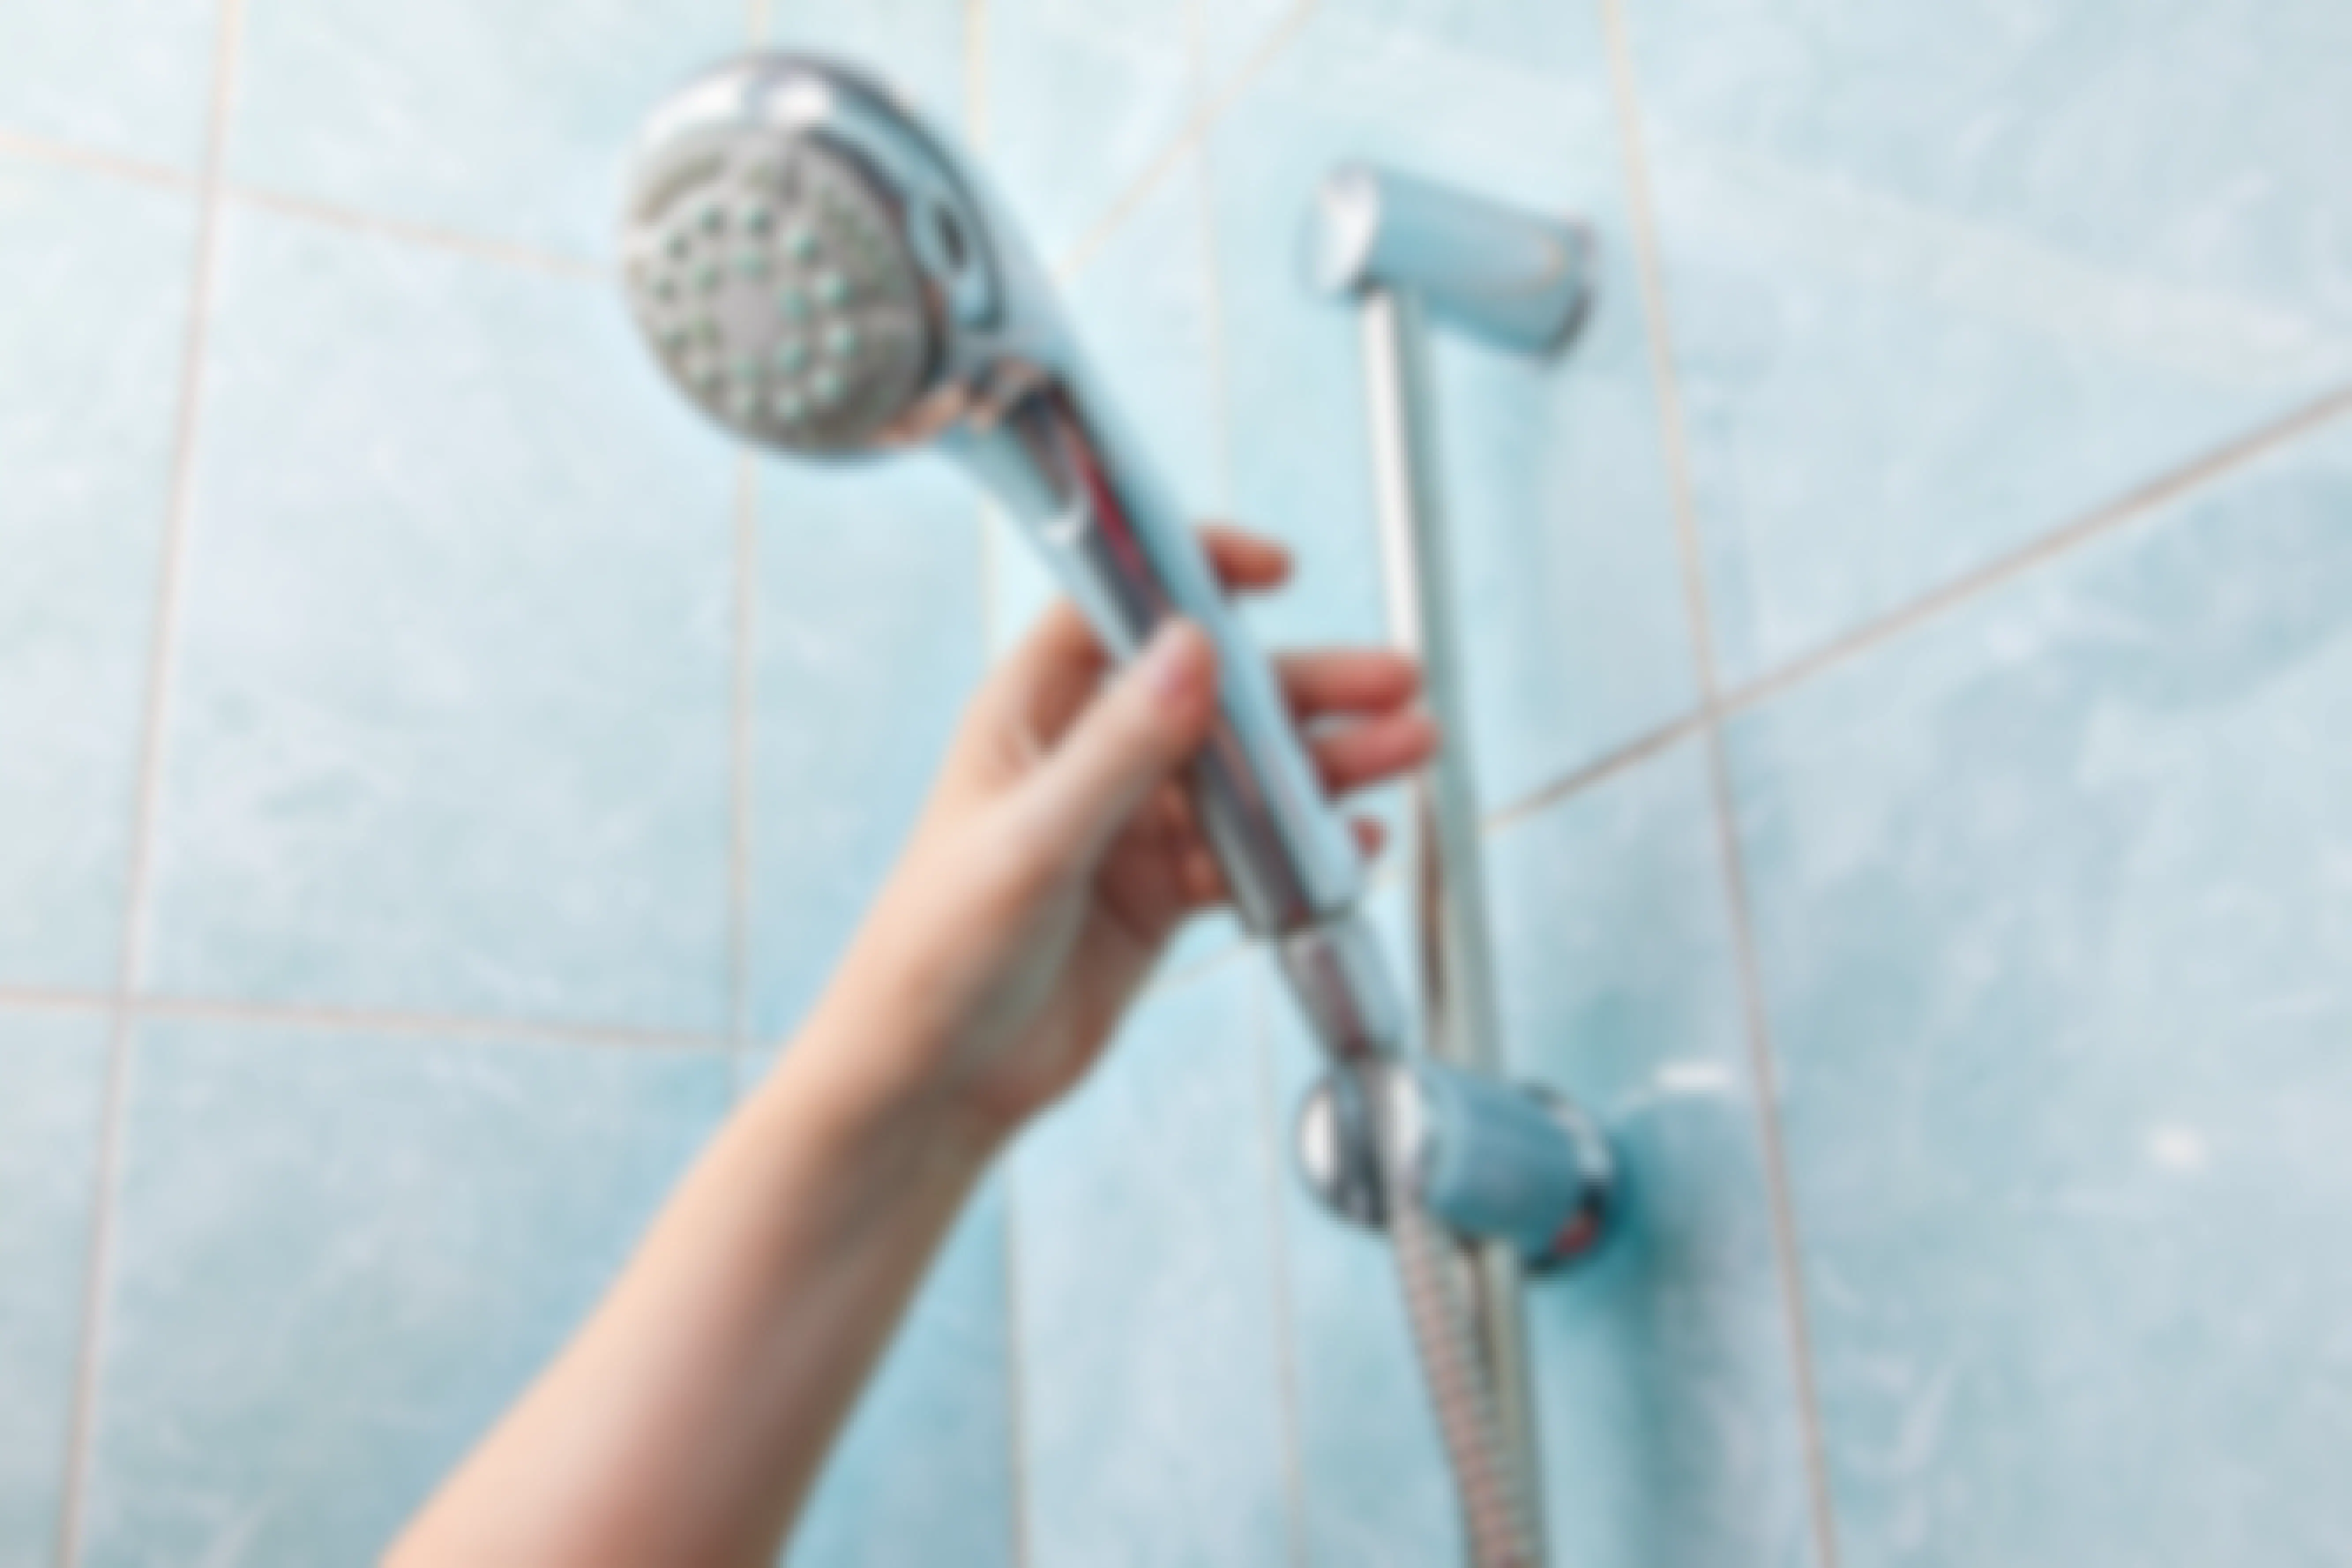 A person's hand reaching up to a shower head with a hose.